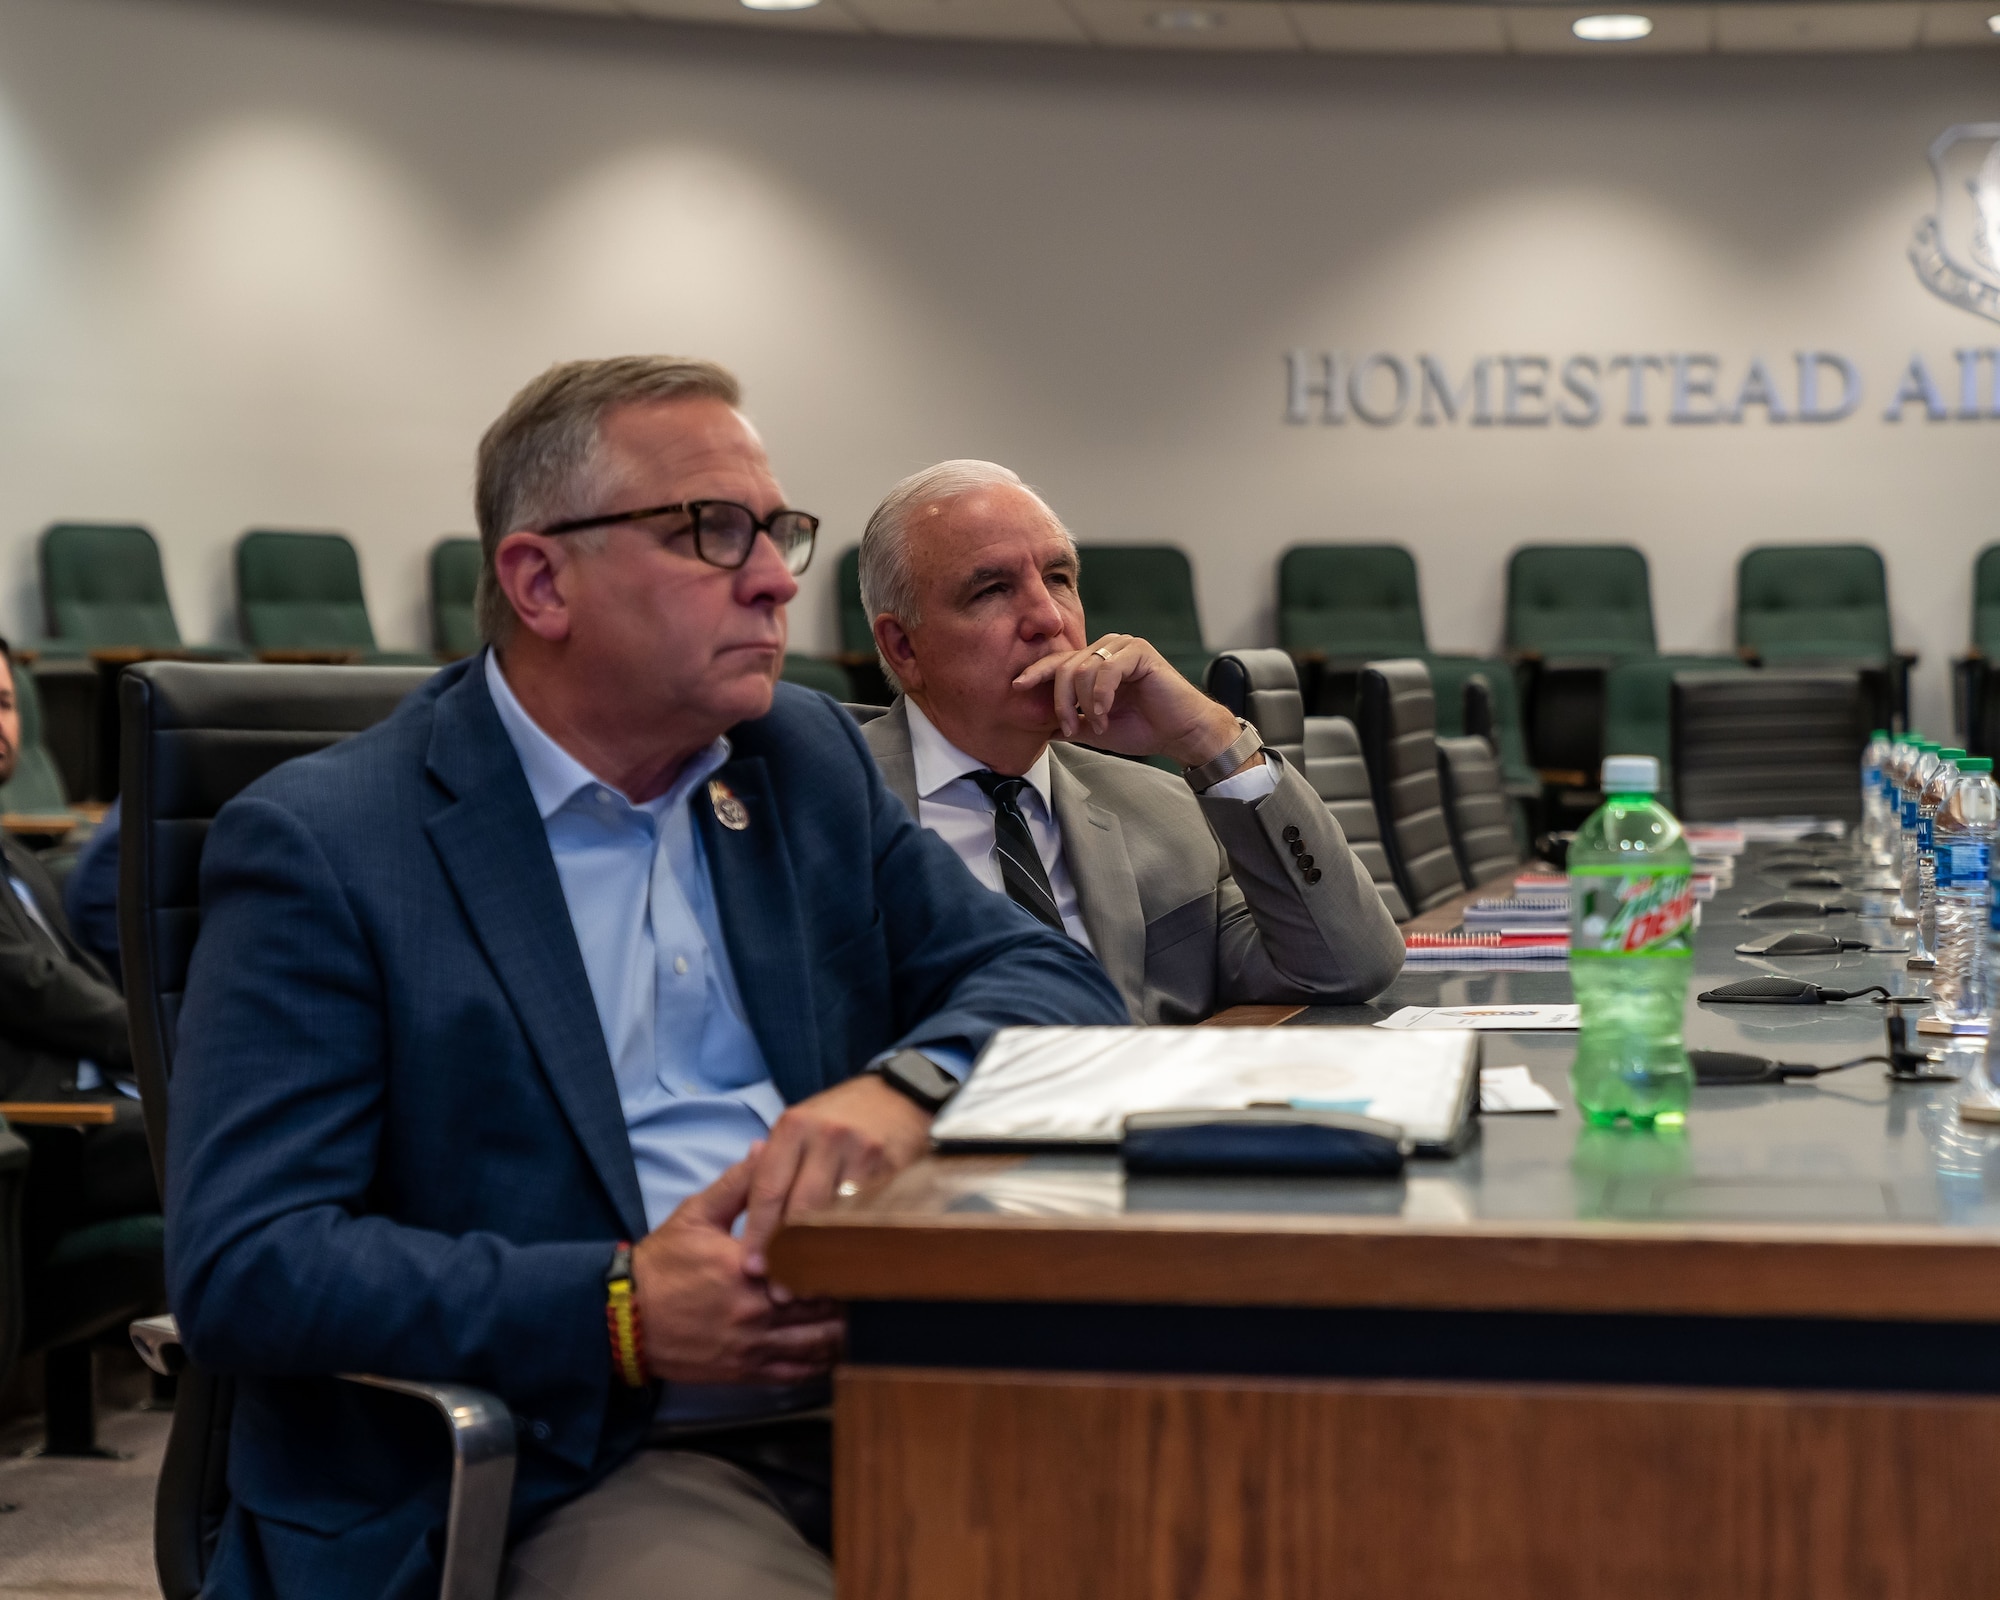 Ranking Member of the House Committee on Veterans Affairs, Rep. Mike Bost, left, of Illinois and Rep. Carlos Gimenez of Florida receive mission brief at Homestead Air Reserve Base, Fla., on June 1, 2022. (U.S. Air Force photo by Tech. Sgt. Leo Castellano)